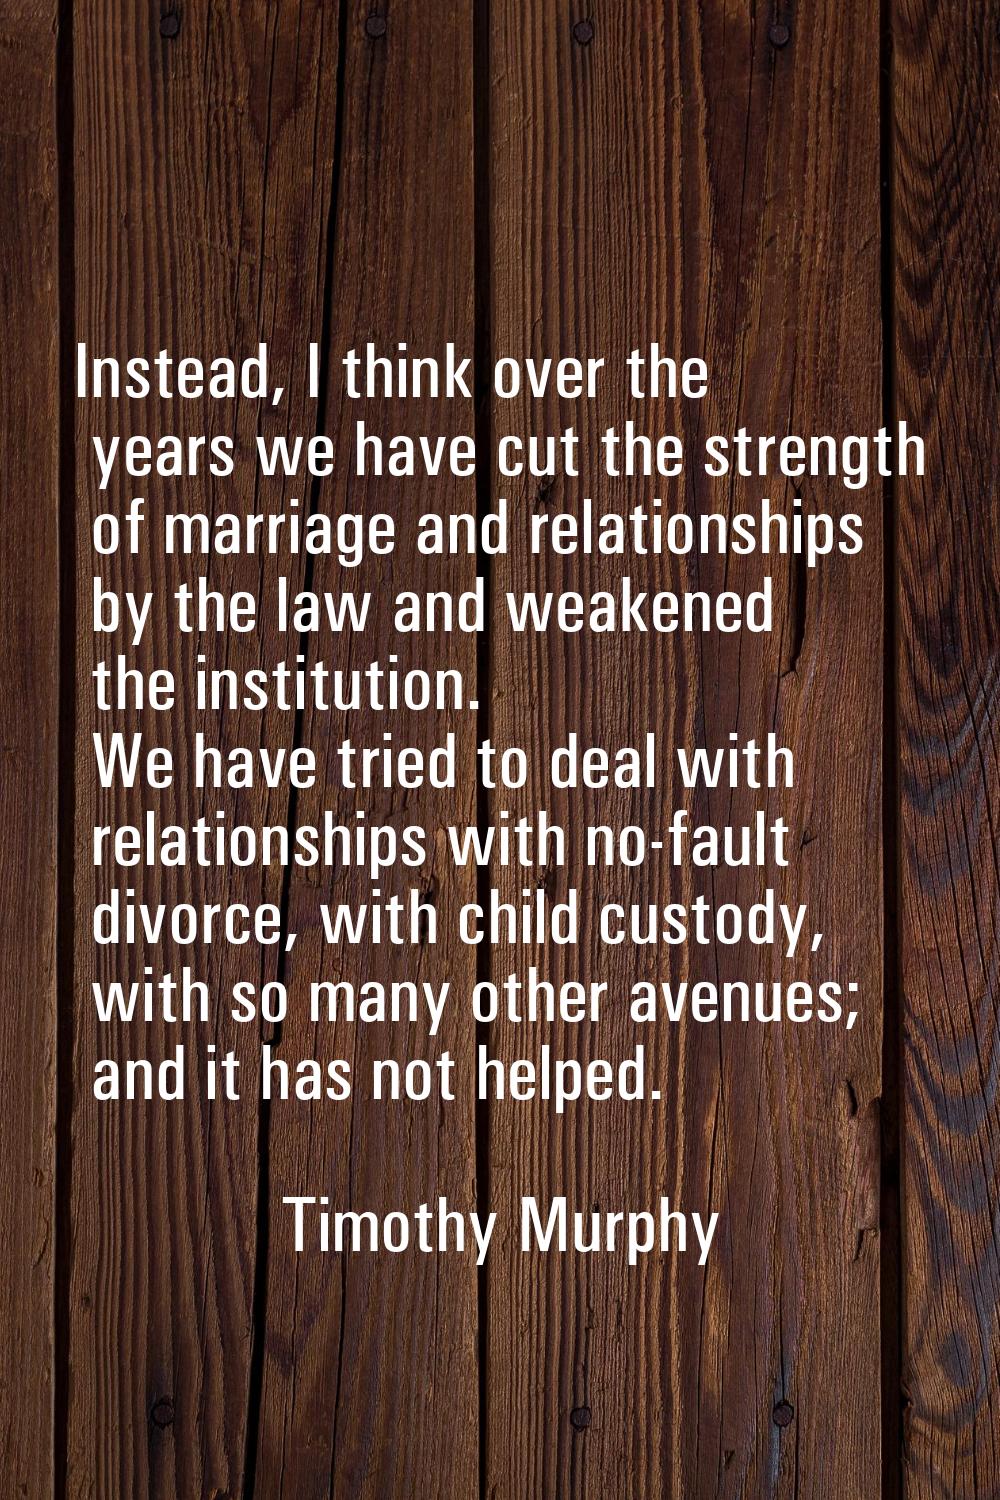 Instead, I think over the years we have cut the strength of marriage and relationships by the law a